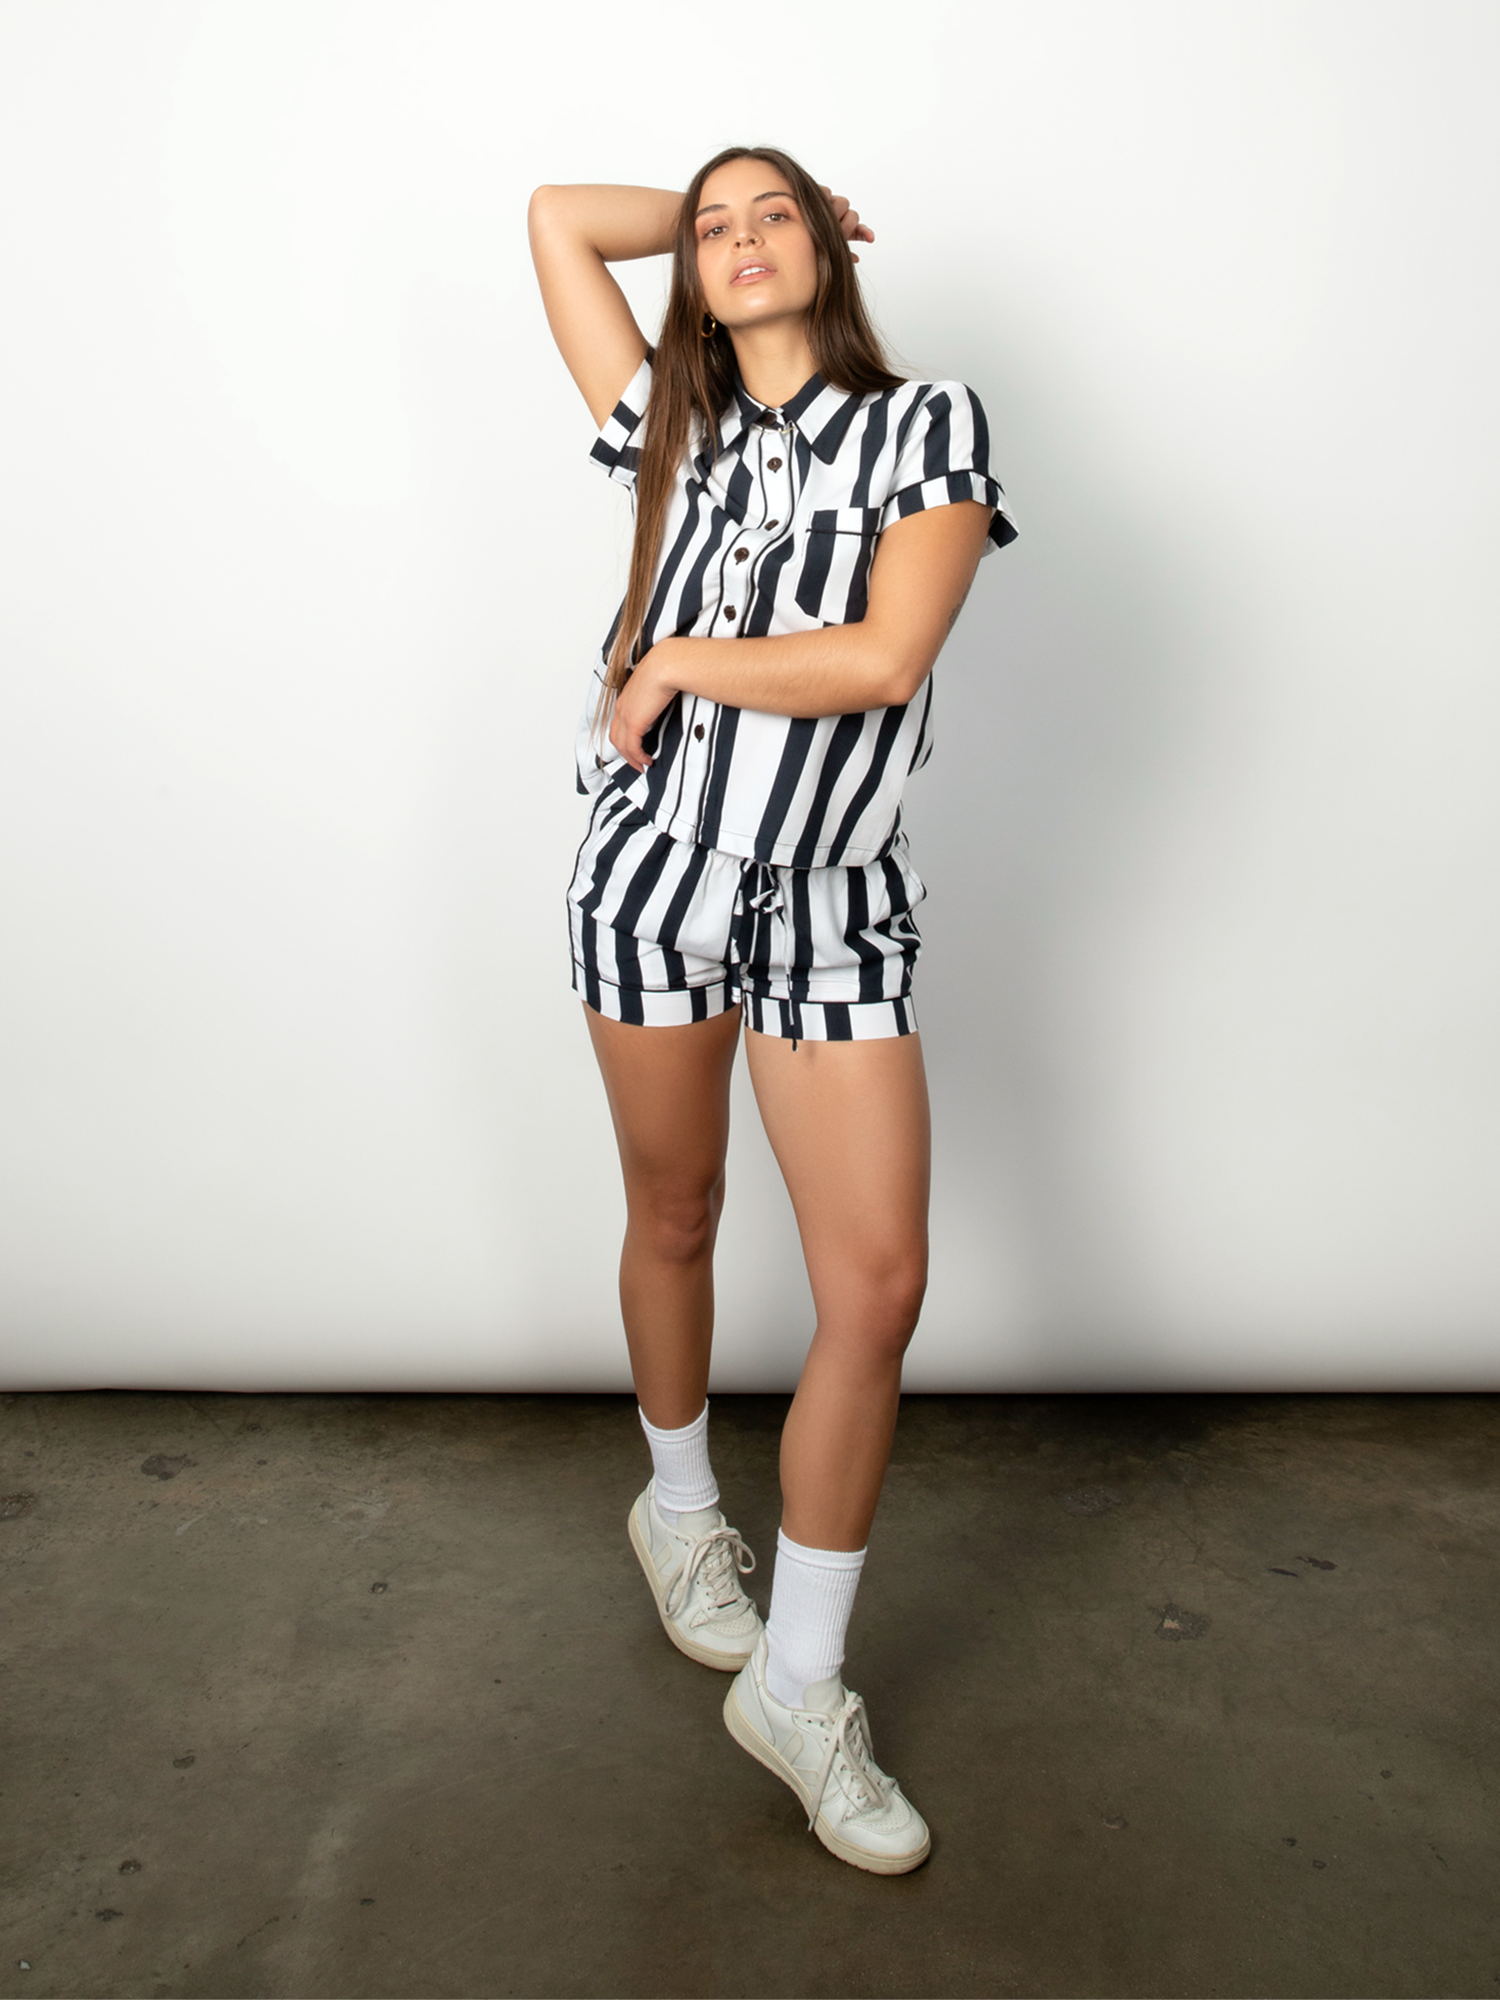 Black and white striped short-sleeve pajama set with black contrast piping.